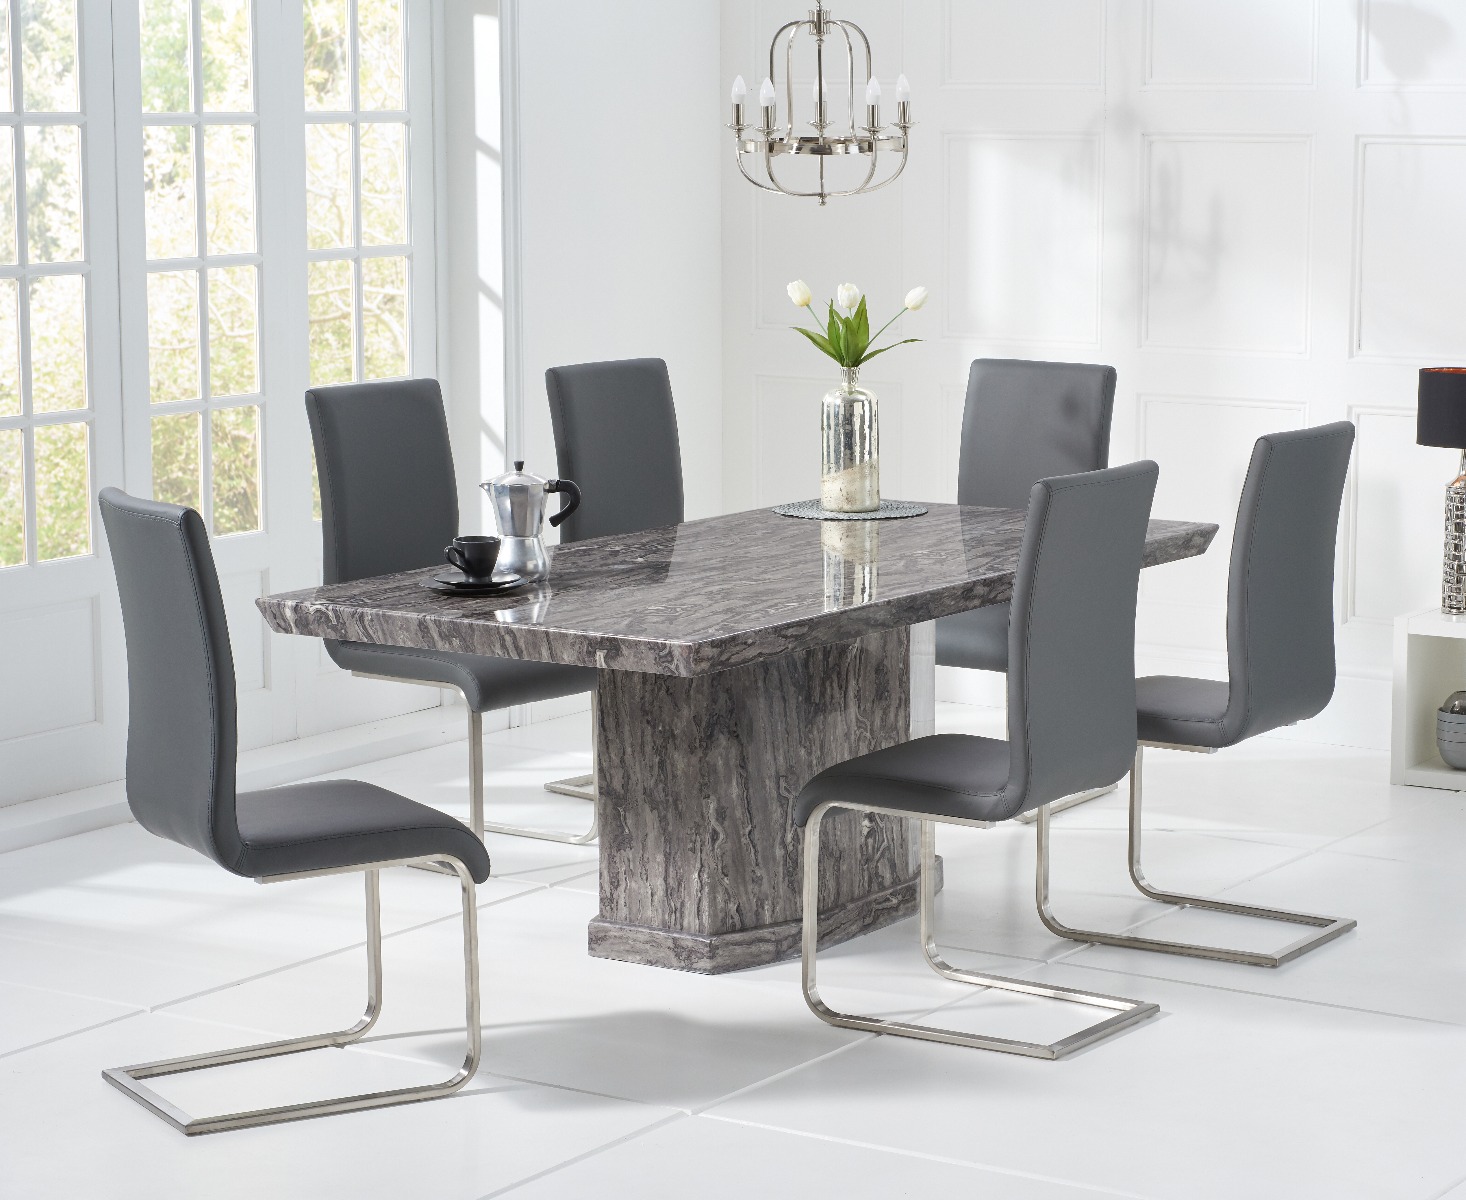 Carvelle 160cm Dark Grey Pedestal Marble Dining Table With 6 Grey Malaga Chairs